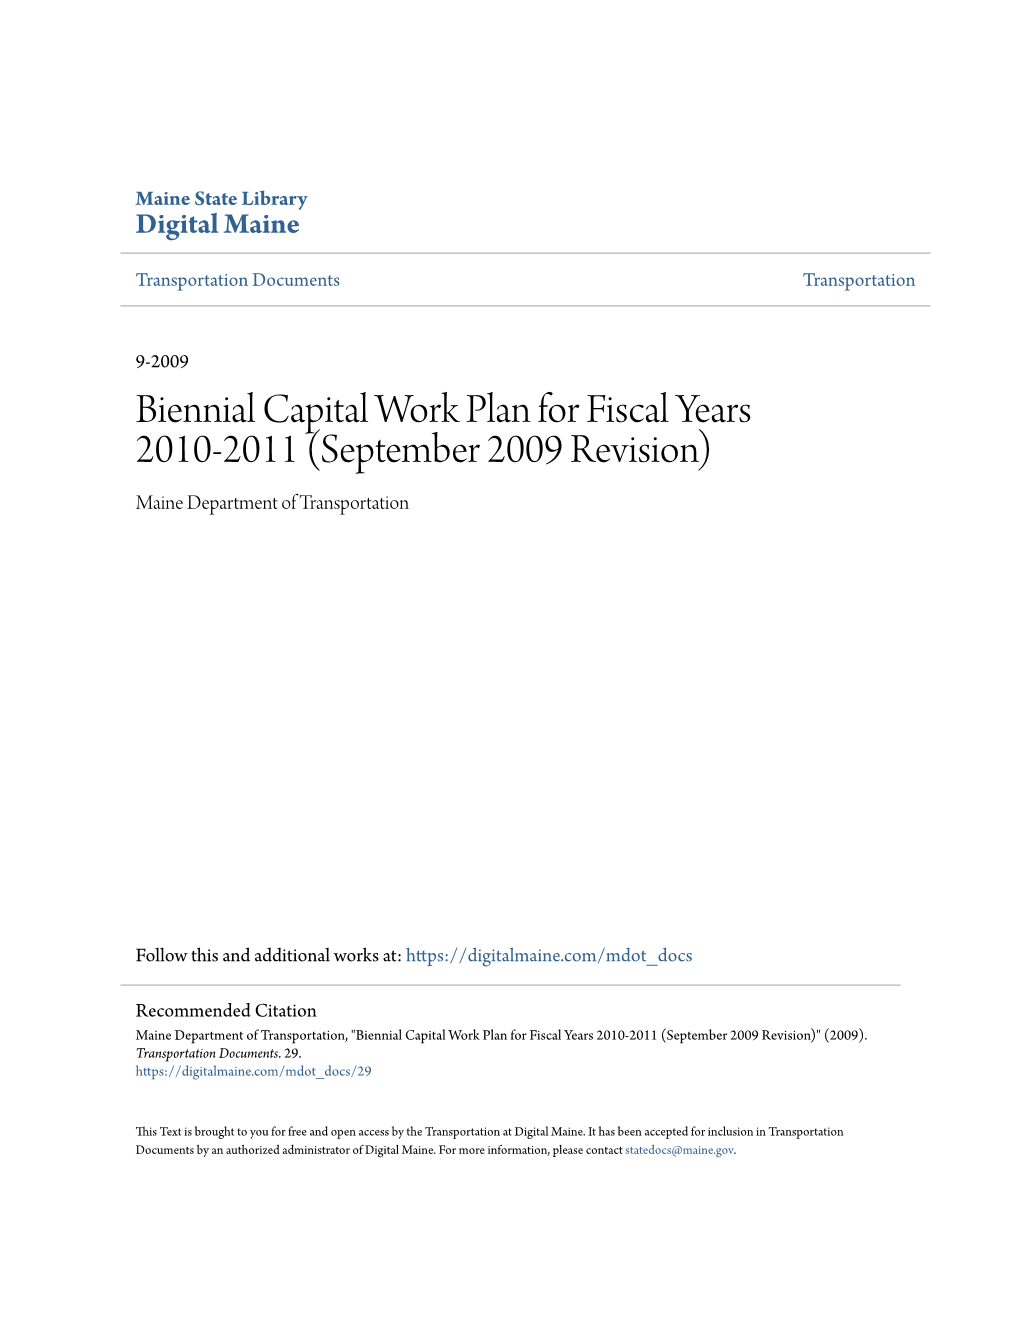 Biennial Capital Work Plan for Fiscal Years 2010-2011 (September 2009 Revision) Maine Department of Transportation